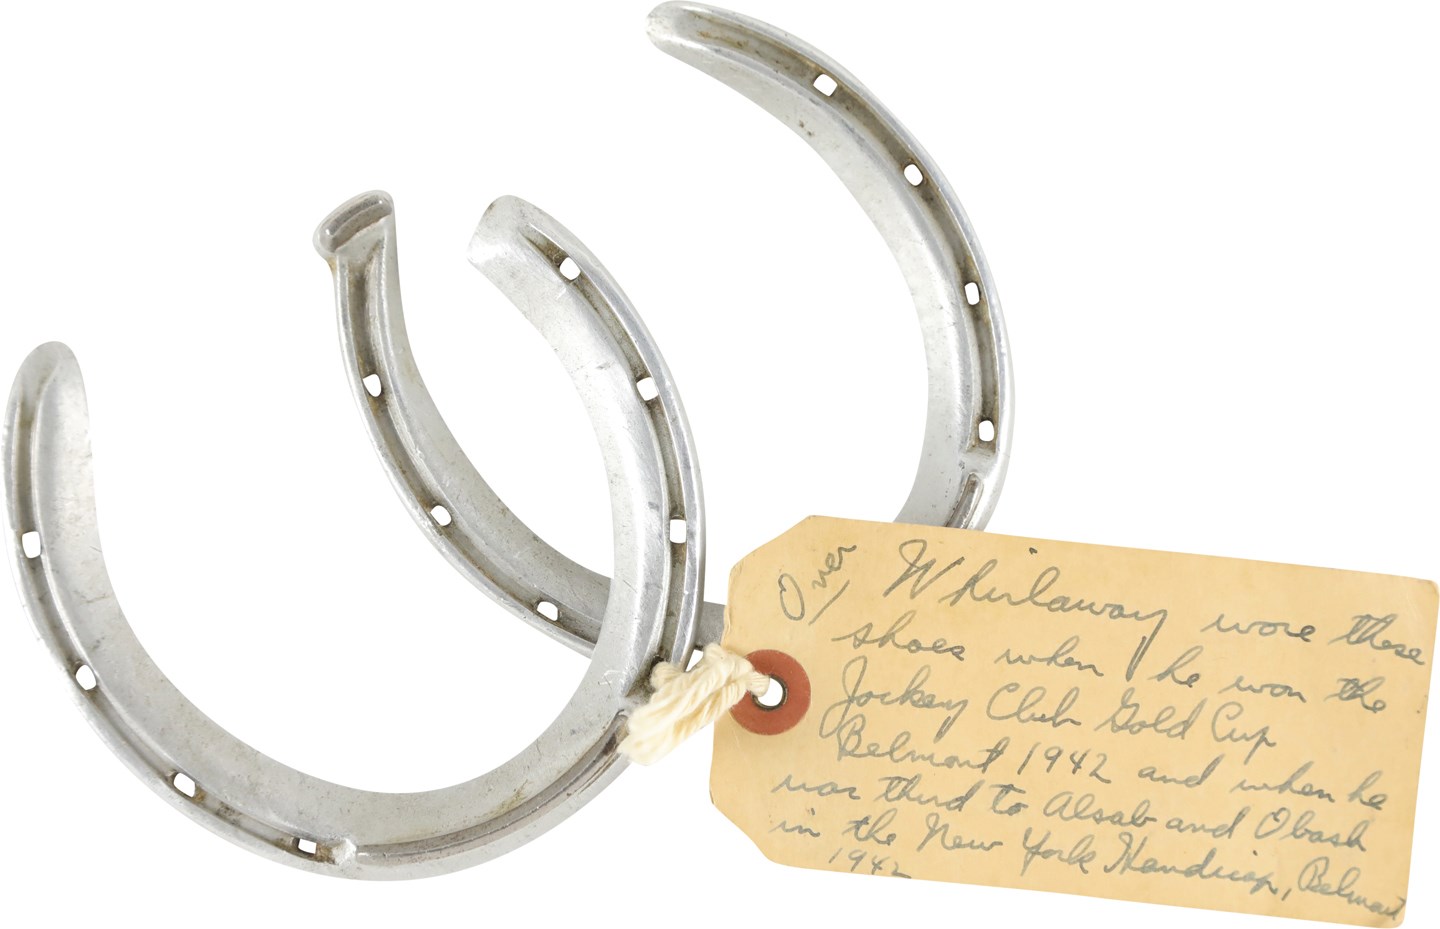 Horse Racing - 1942 Whirlaway Horseshoes from Jockey Club Gold Cup Victory and New York Handicap Races